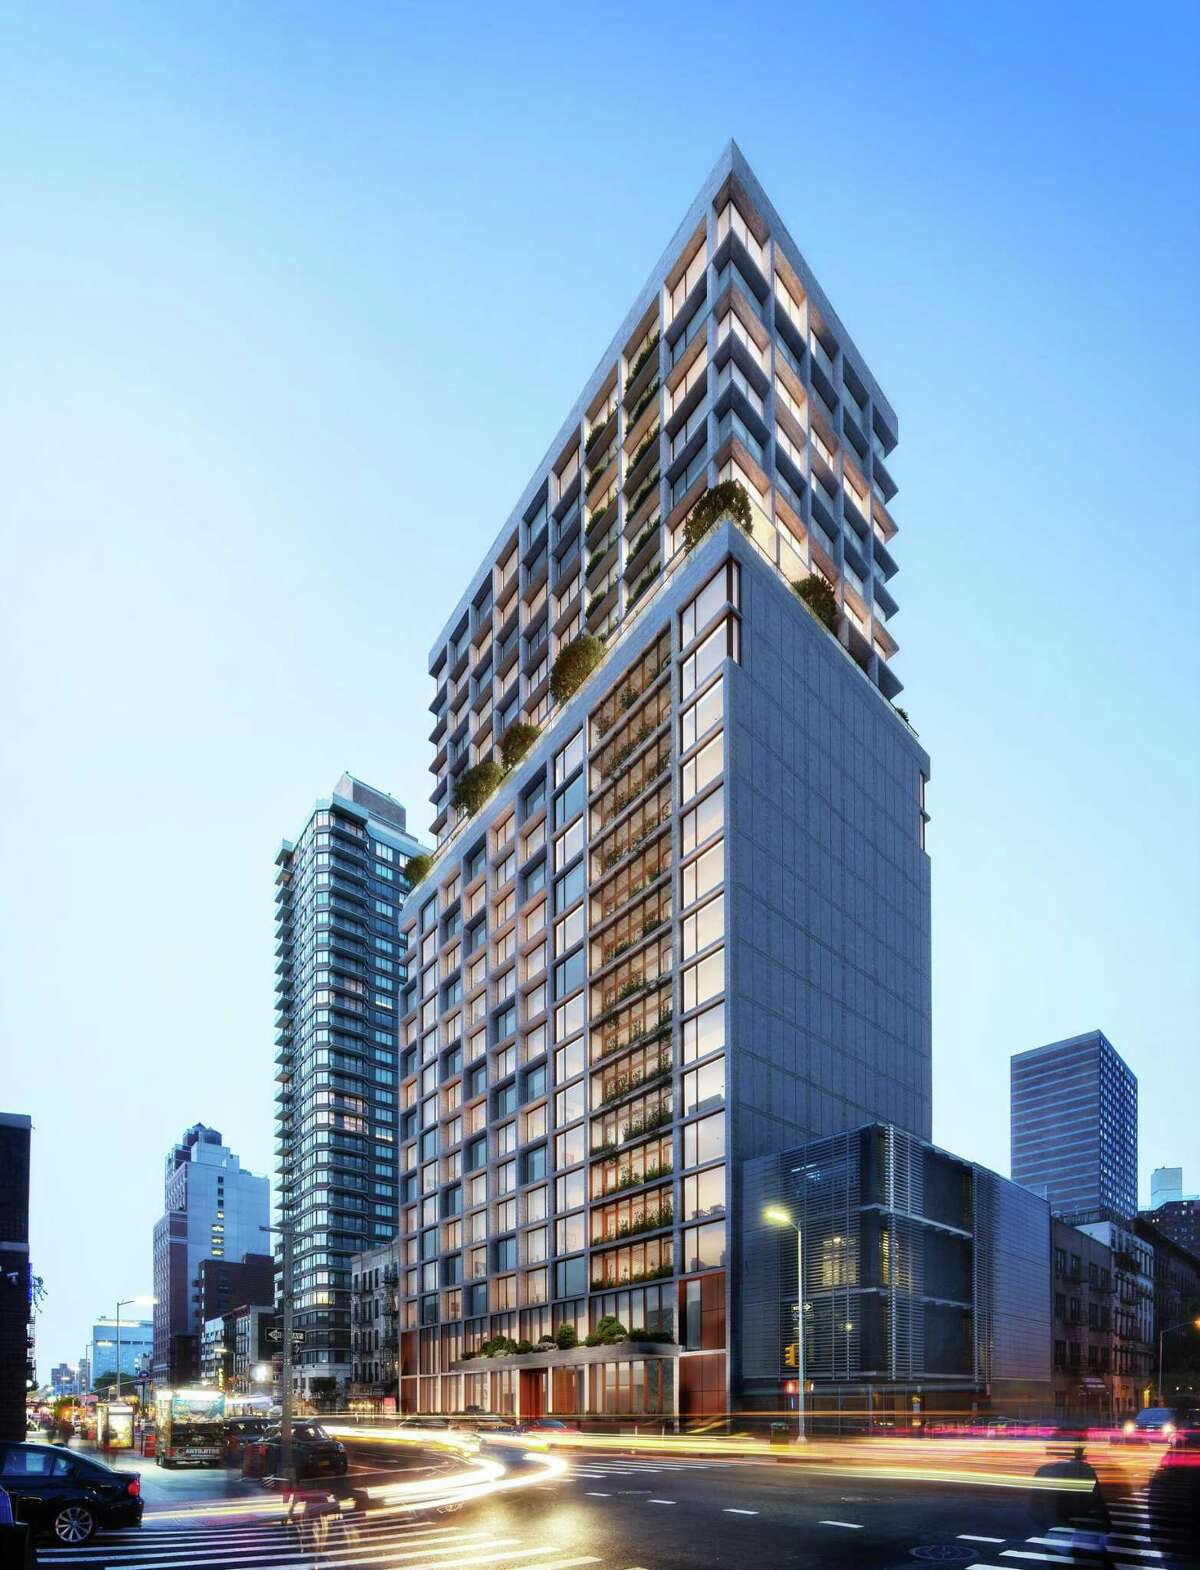 An exterior rendering of the senior living facility being built by Maplewood in Manhattan's Upper East Side.